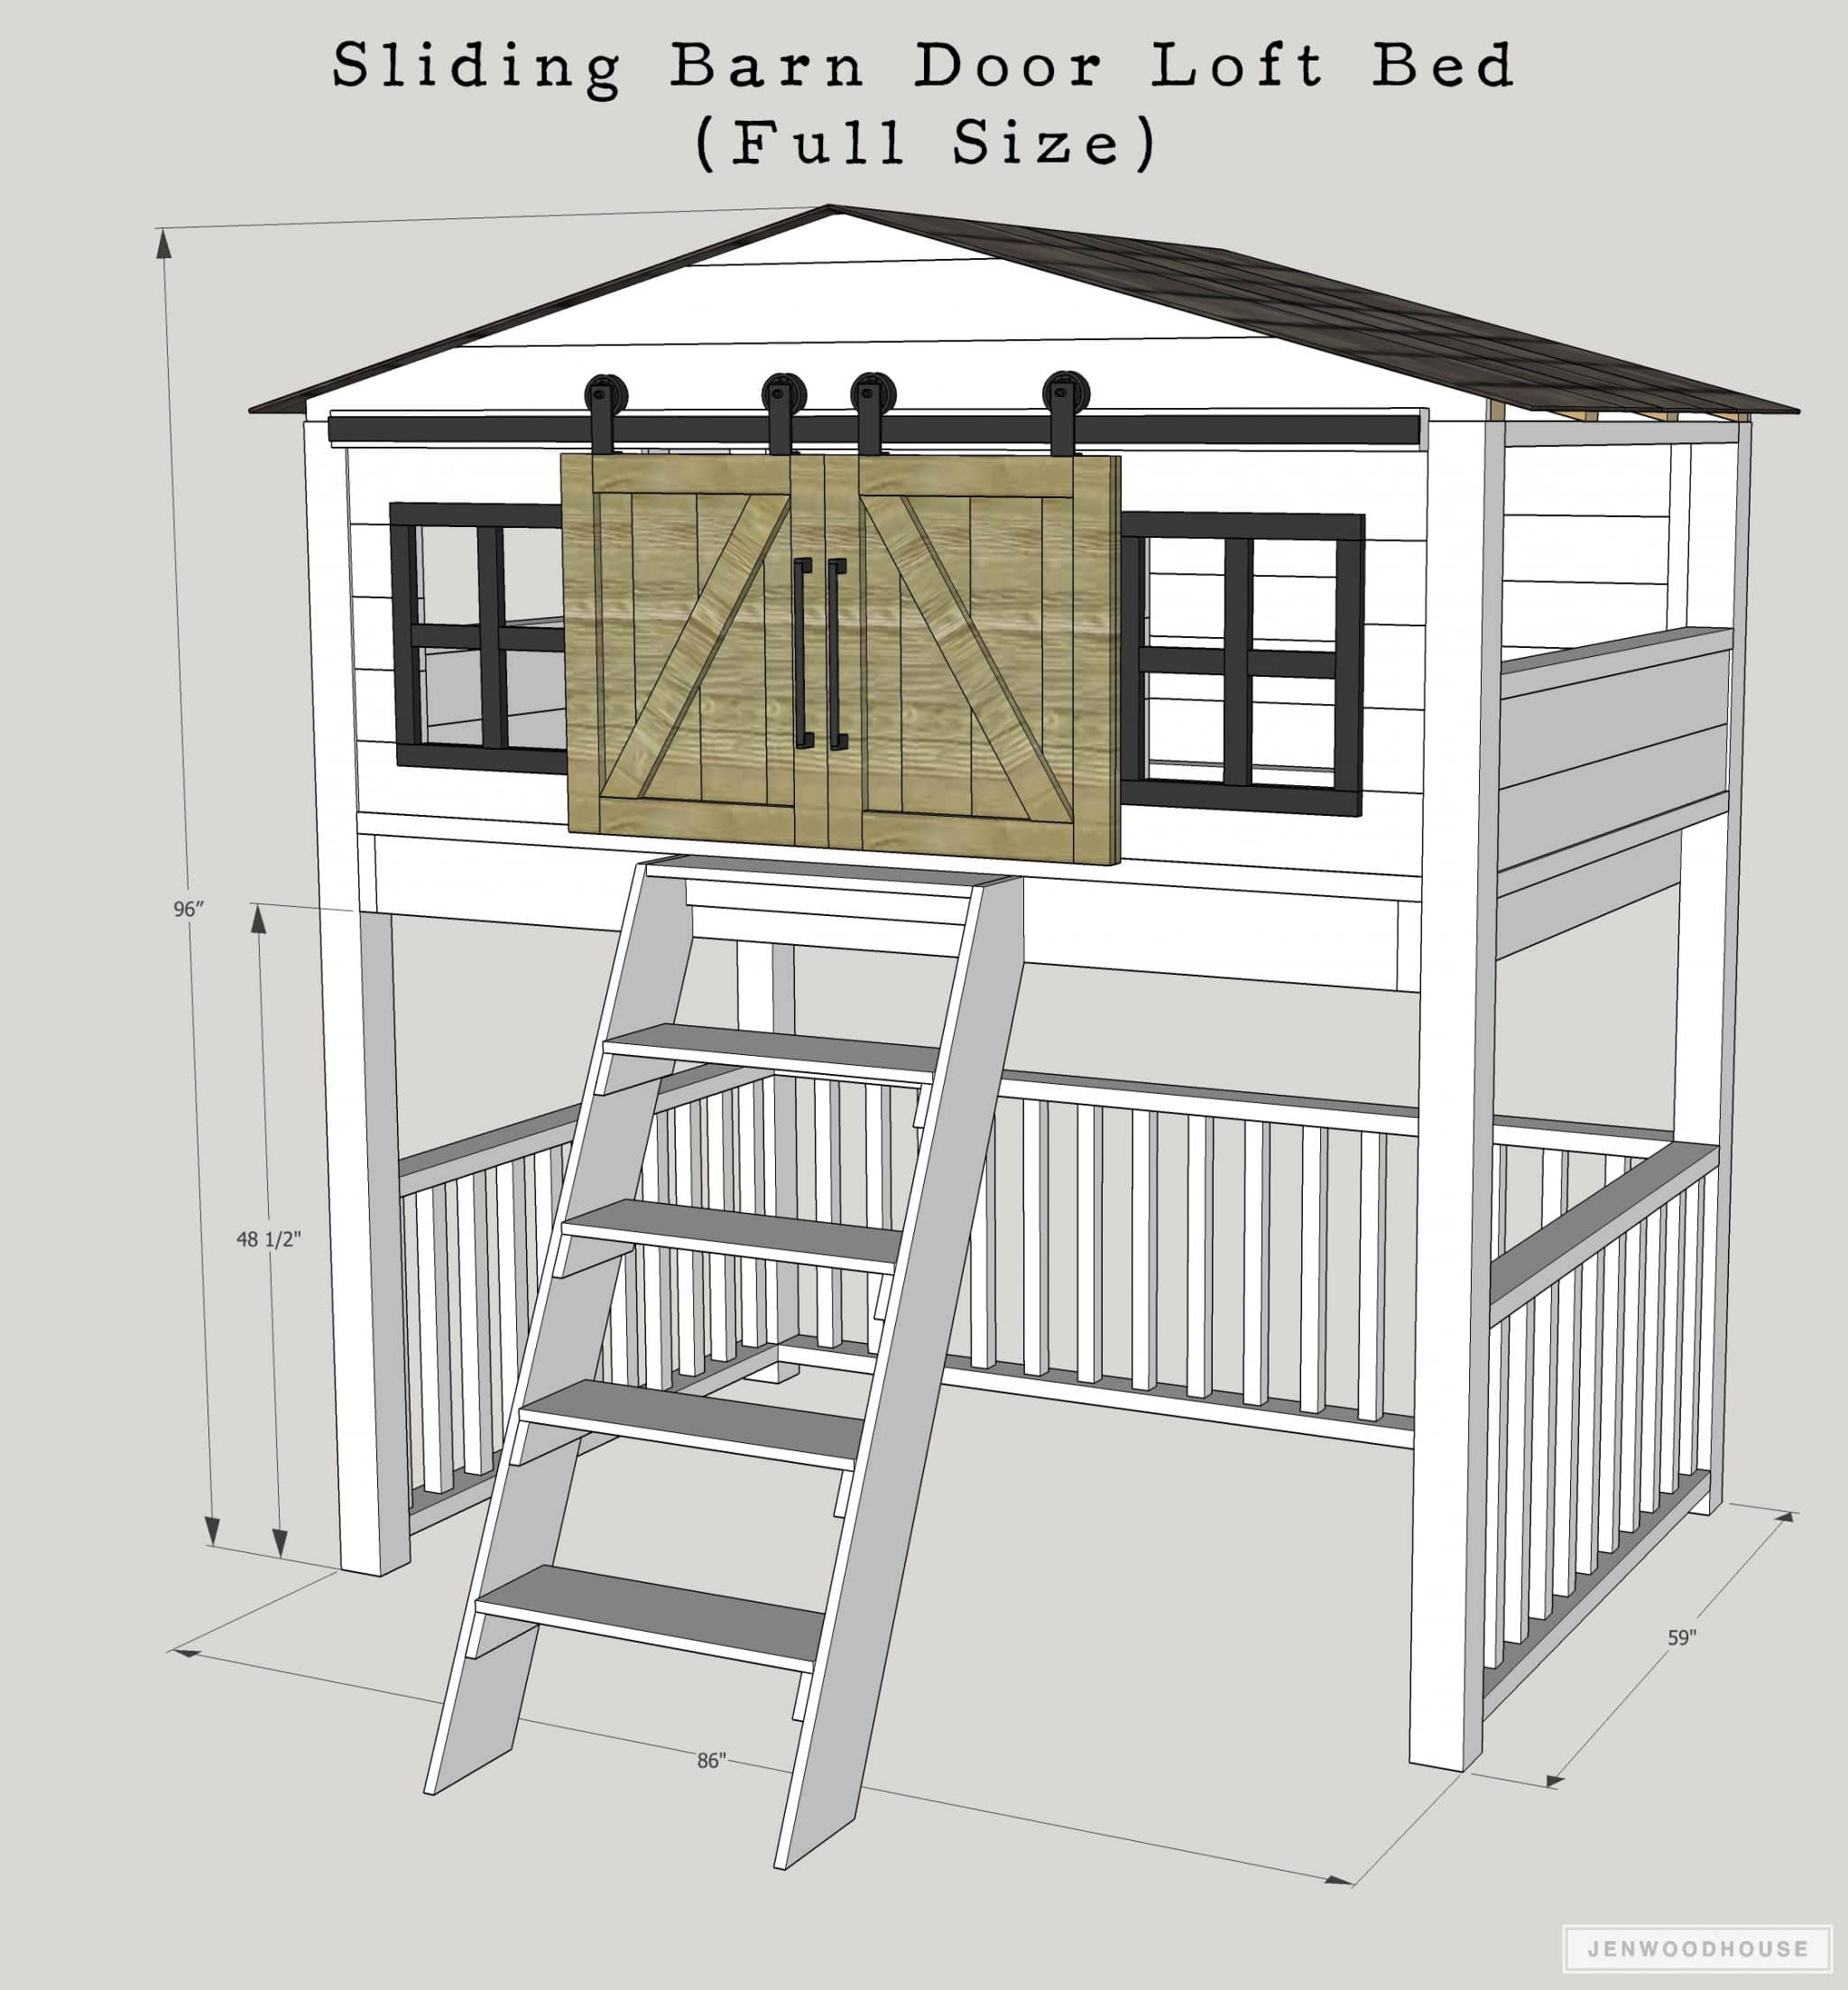 Build A Diy Sliding Barn Door Loft Bed, How To Build A Full Size Loft Bed With Stairs